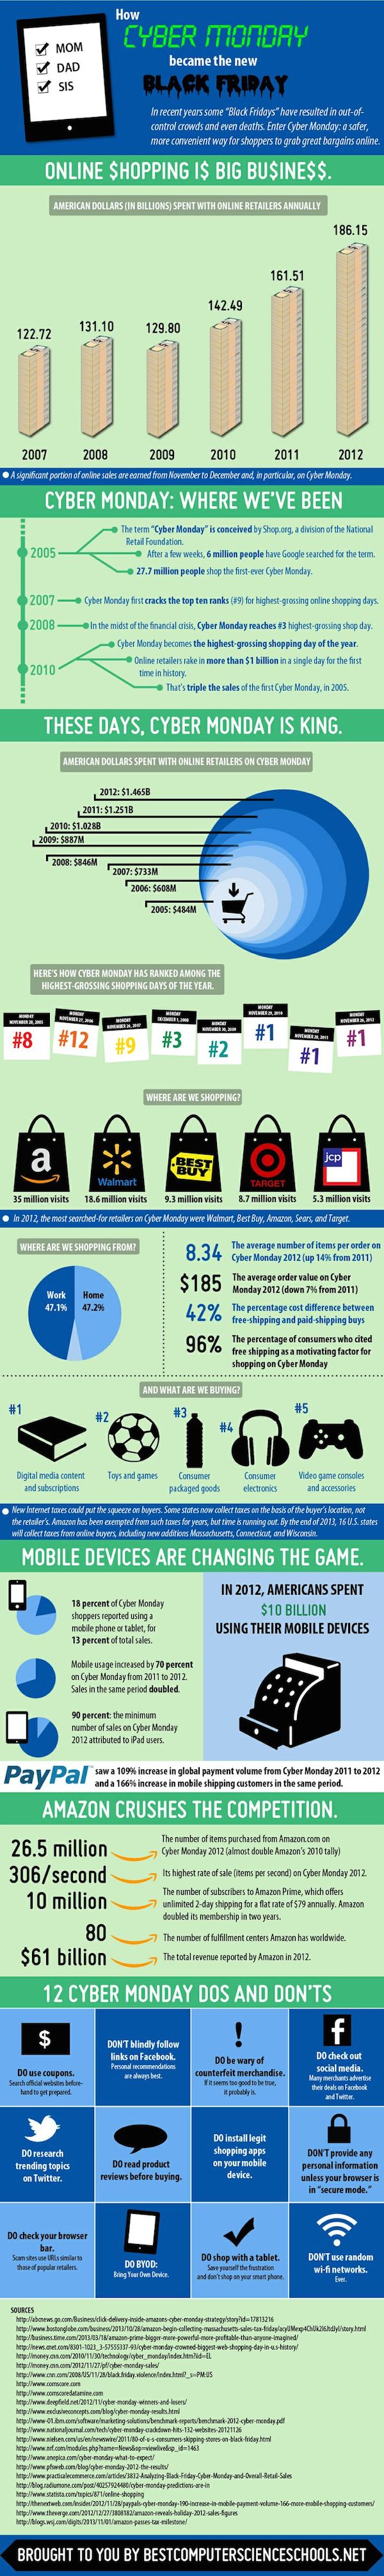 20 Black Friday And Cyber Monday Infographics image 14.jpg